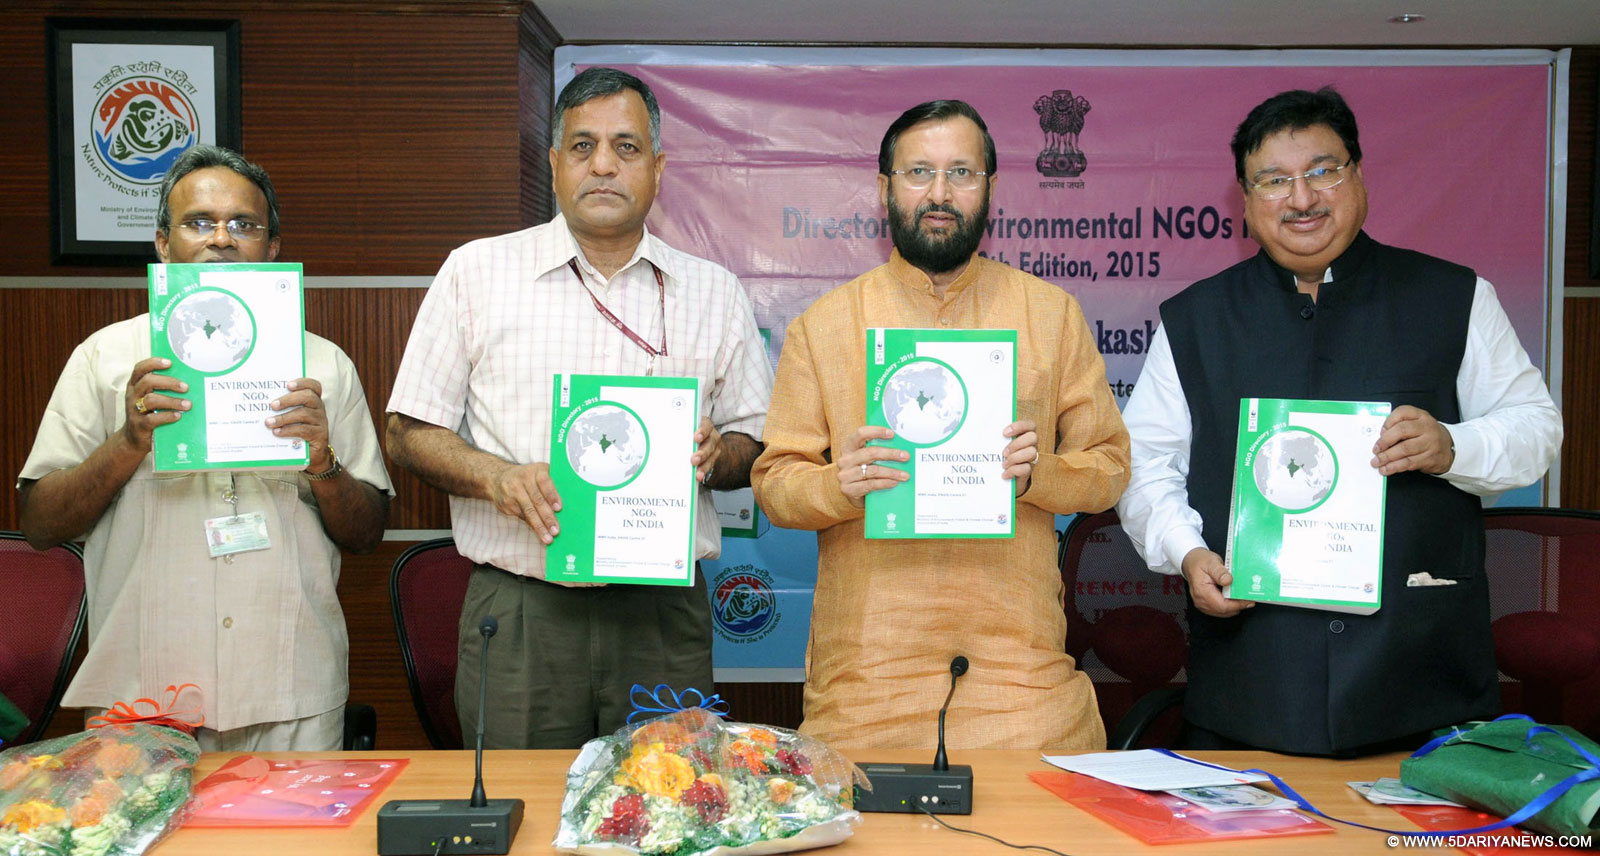 The Minister of State for Environment, Forest and Climate Change (Independent Charge), Shri Prakash Javadekar releasing the NGO Directory, in New Delhi on October 06, 2015. The Secretary, Ministry of Environment, Forest and Climate Change, Shri Ashok Lavasa is also seen.